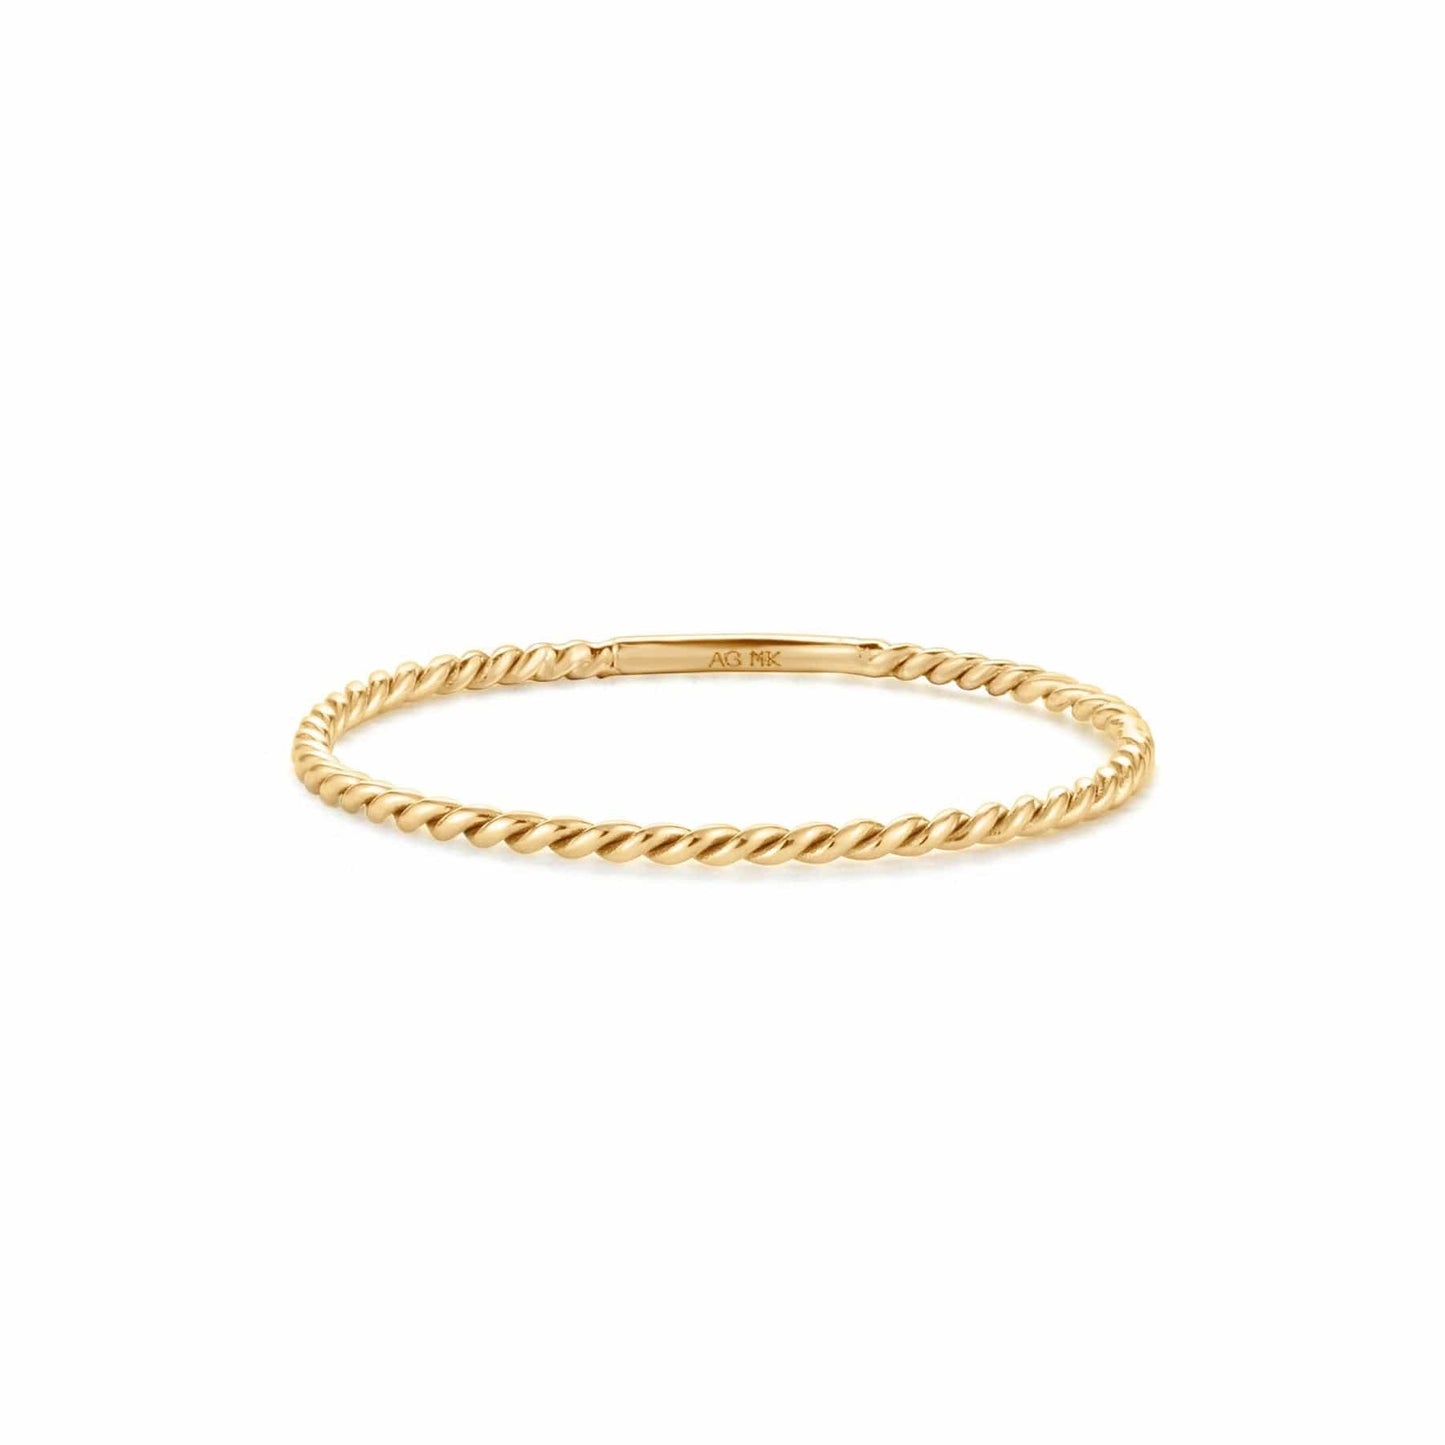 RNG-14K Infinity Twist Band Ring